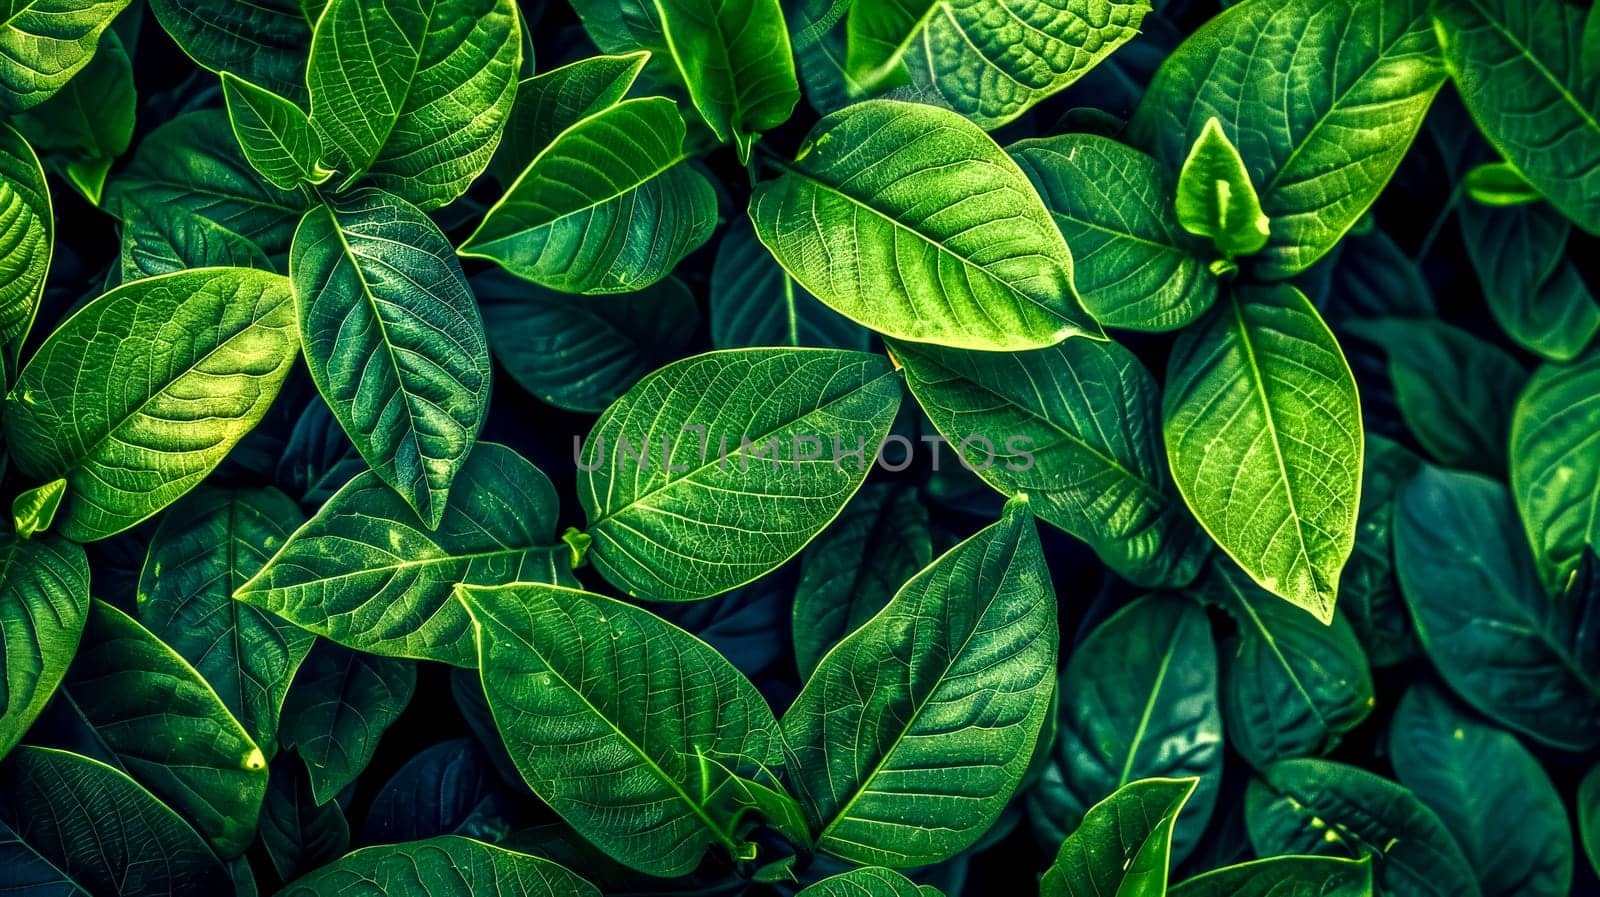 Lush green leaf texture background by Edophoto